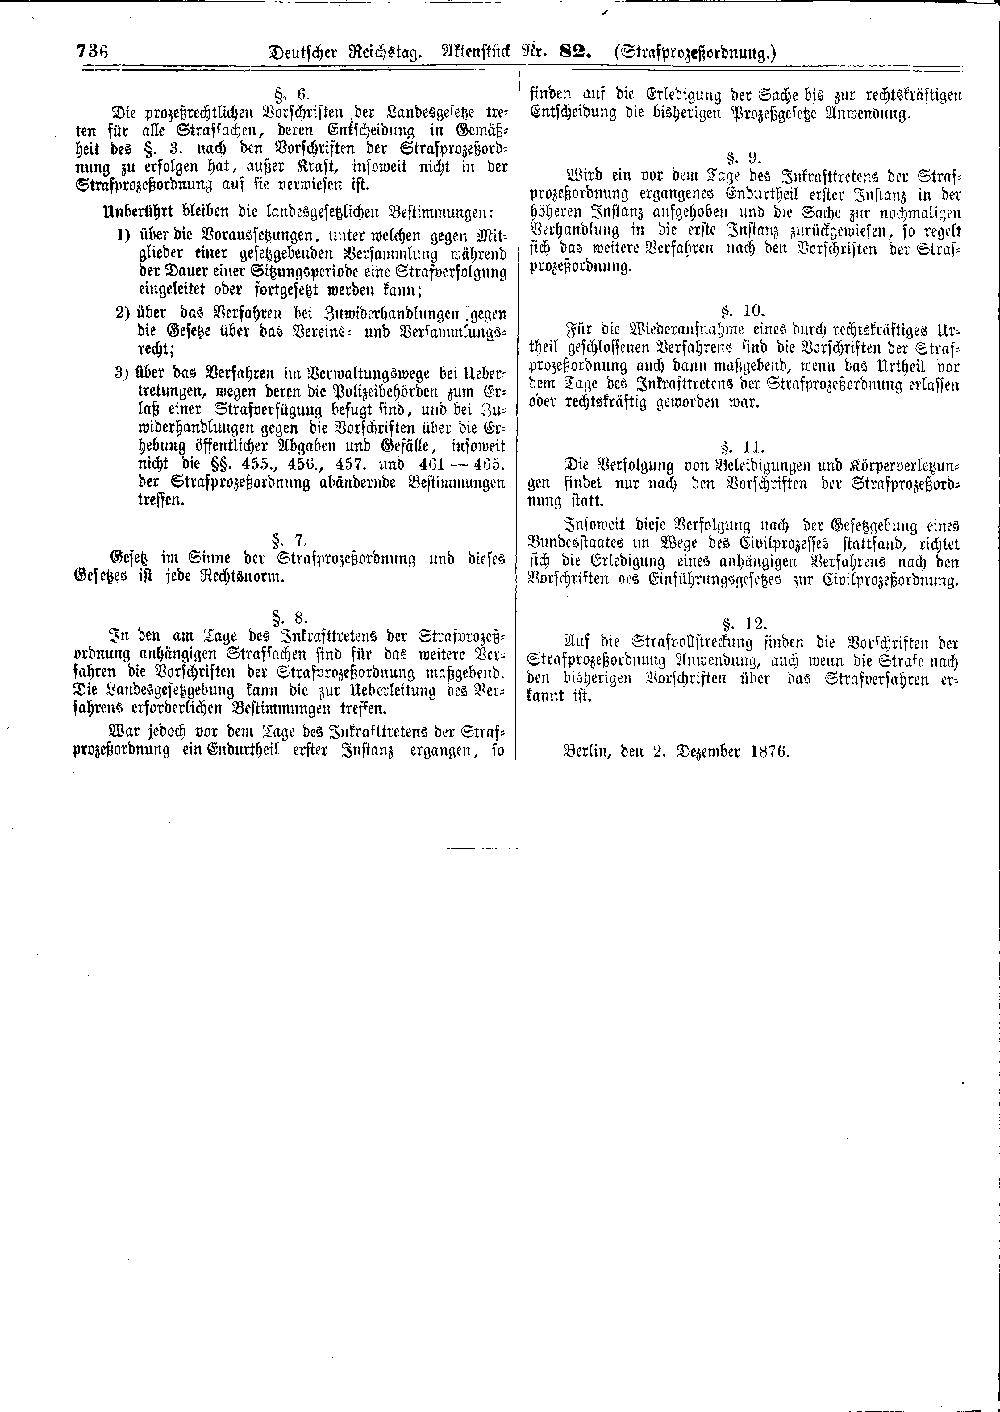 Scan of page 736